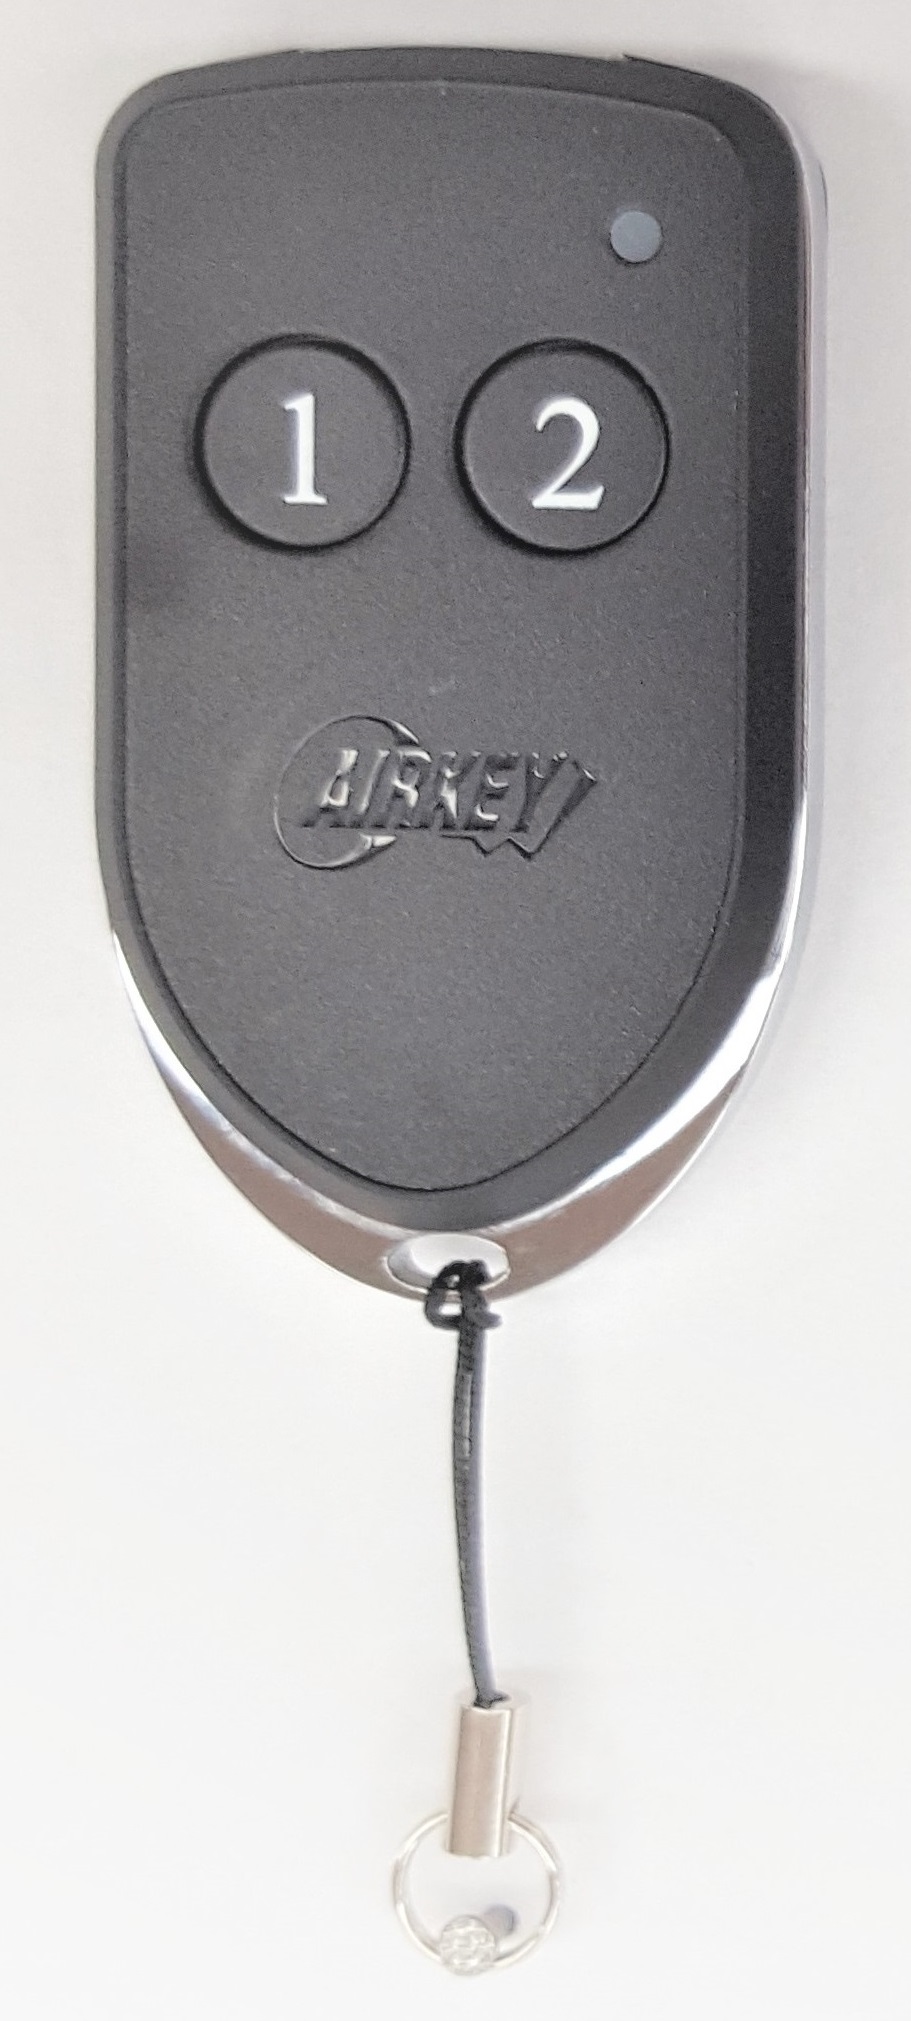 AIRKEY SERIES-4, 2 BUTTON REMOTE 37-BIT WIEGAND TRANSMITTER 433.92MHz IP65 BLACK WITH SILVER TRIM WITH BLACK KEYS 1/2 ROLLING CODE ENCRYPTION